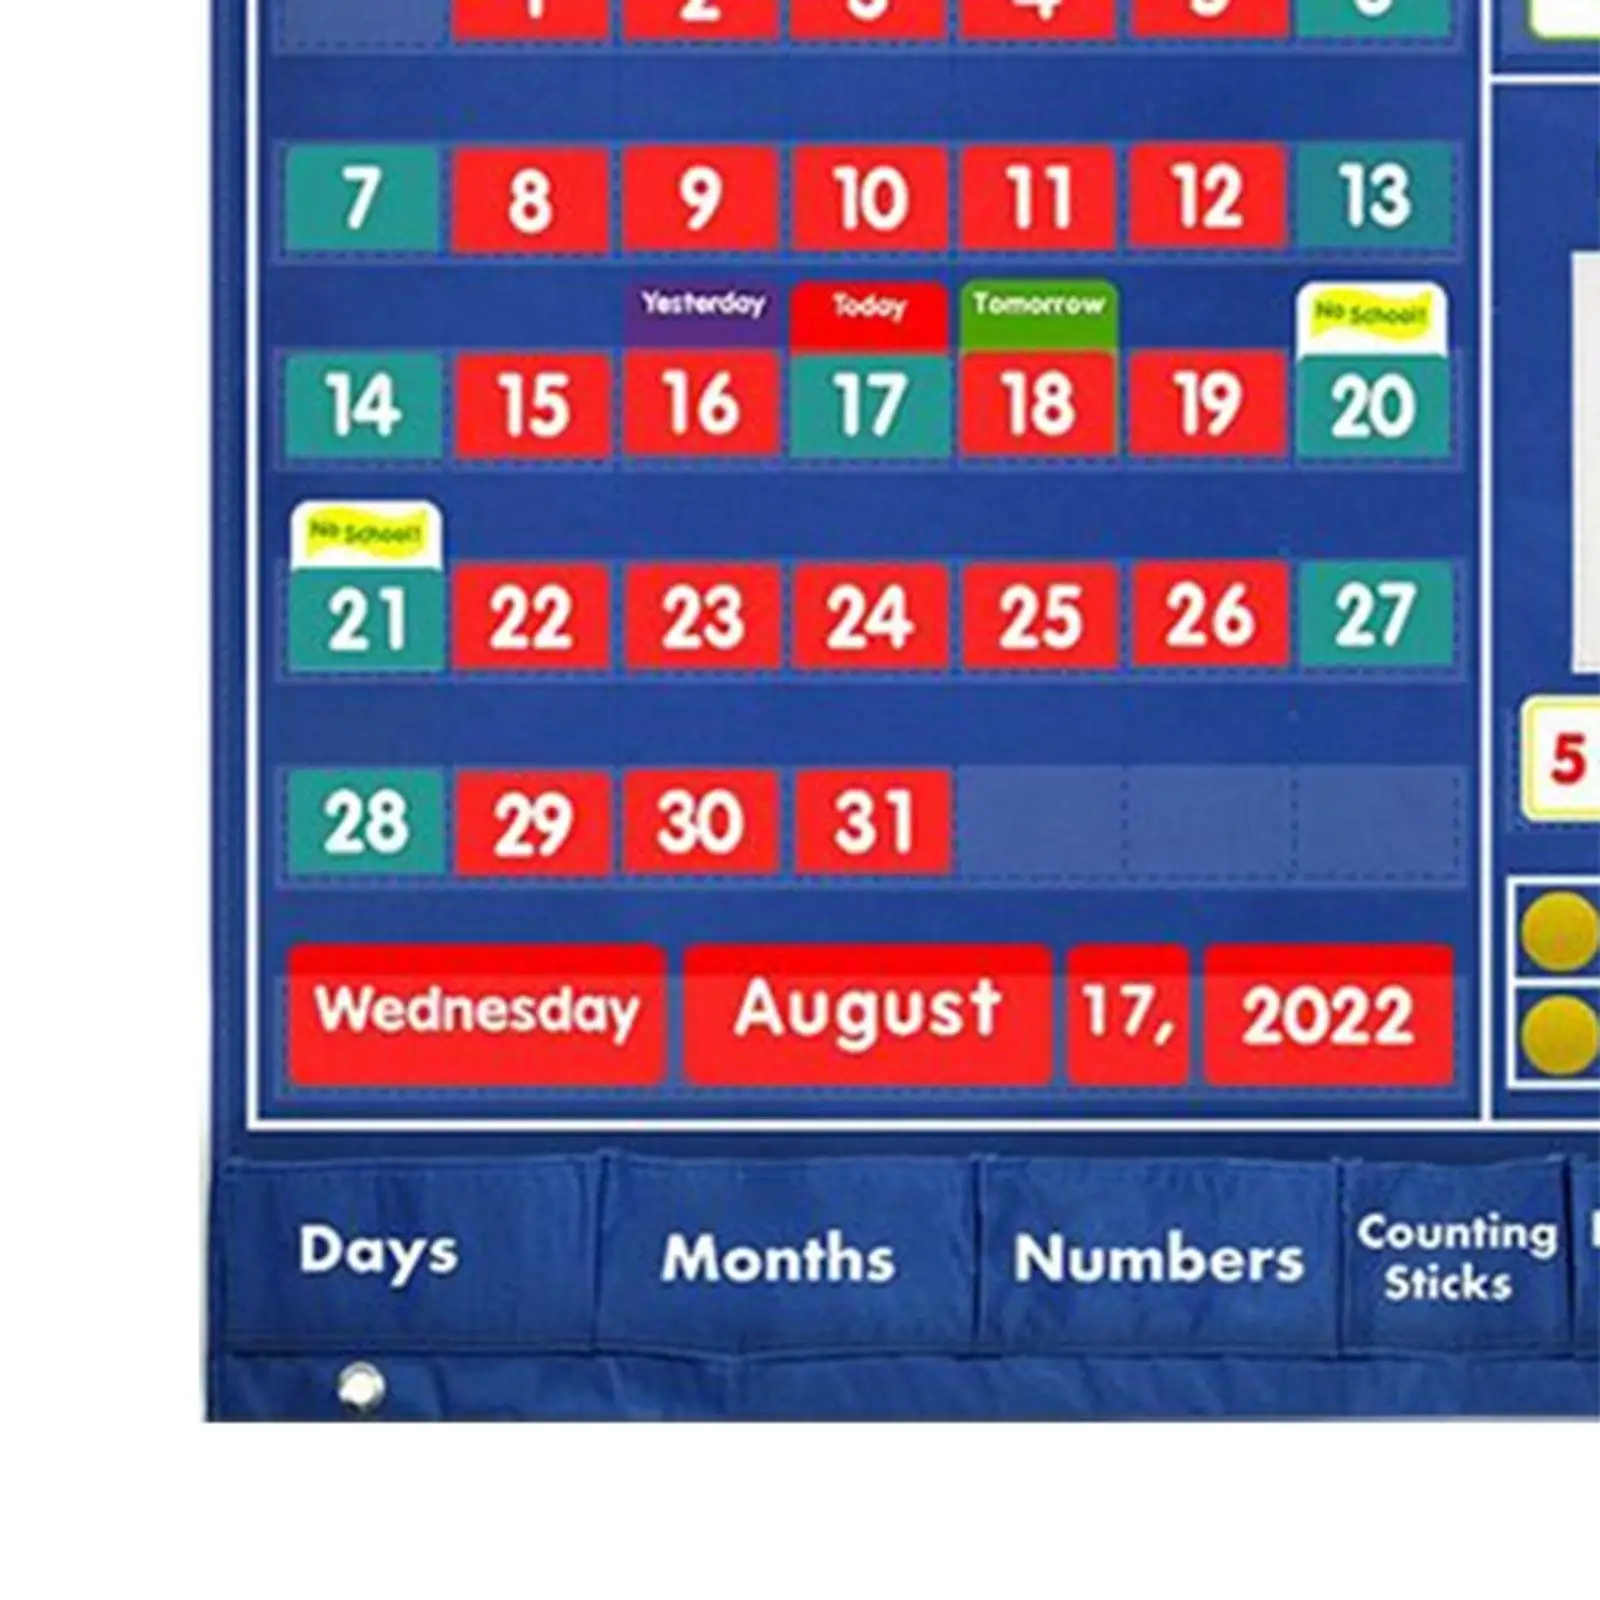 Math Calendar Educational Pocket Chart Teaching Aid 249 Cards for All About Number Activities Daily Math Activities kids